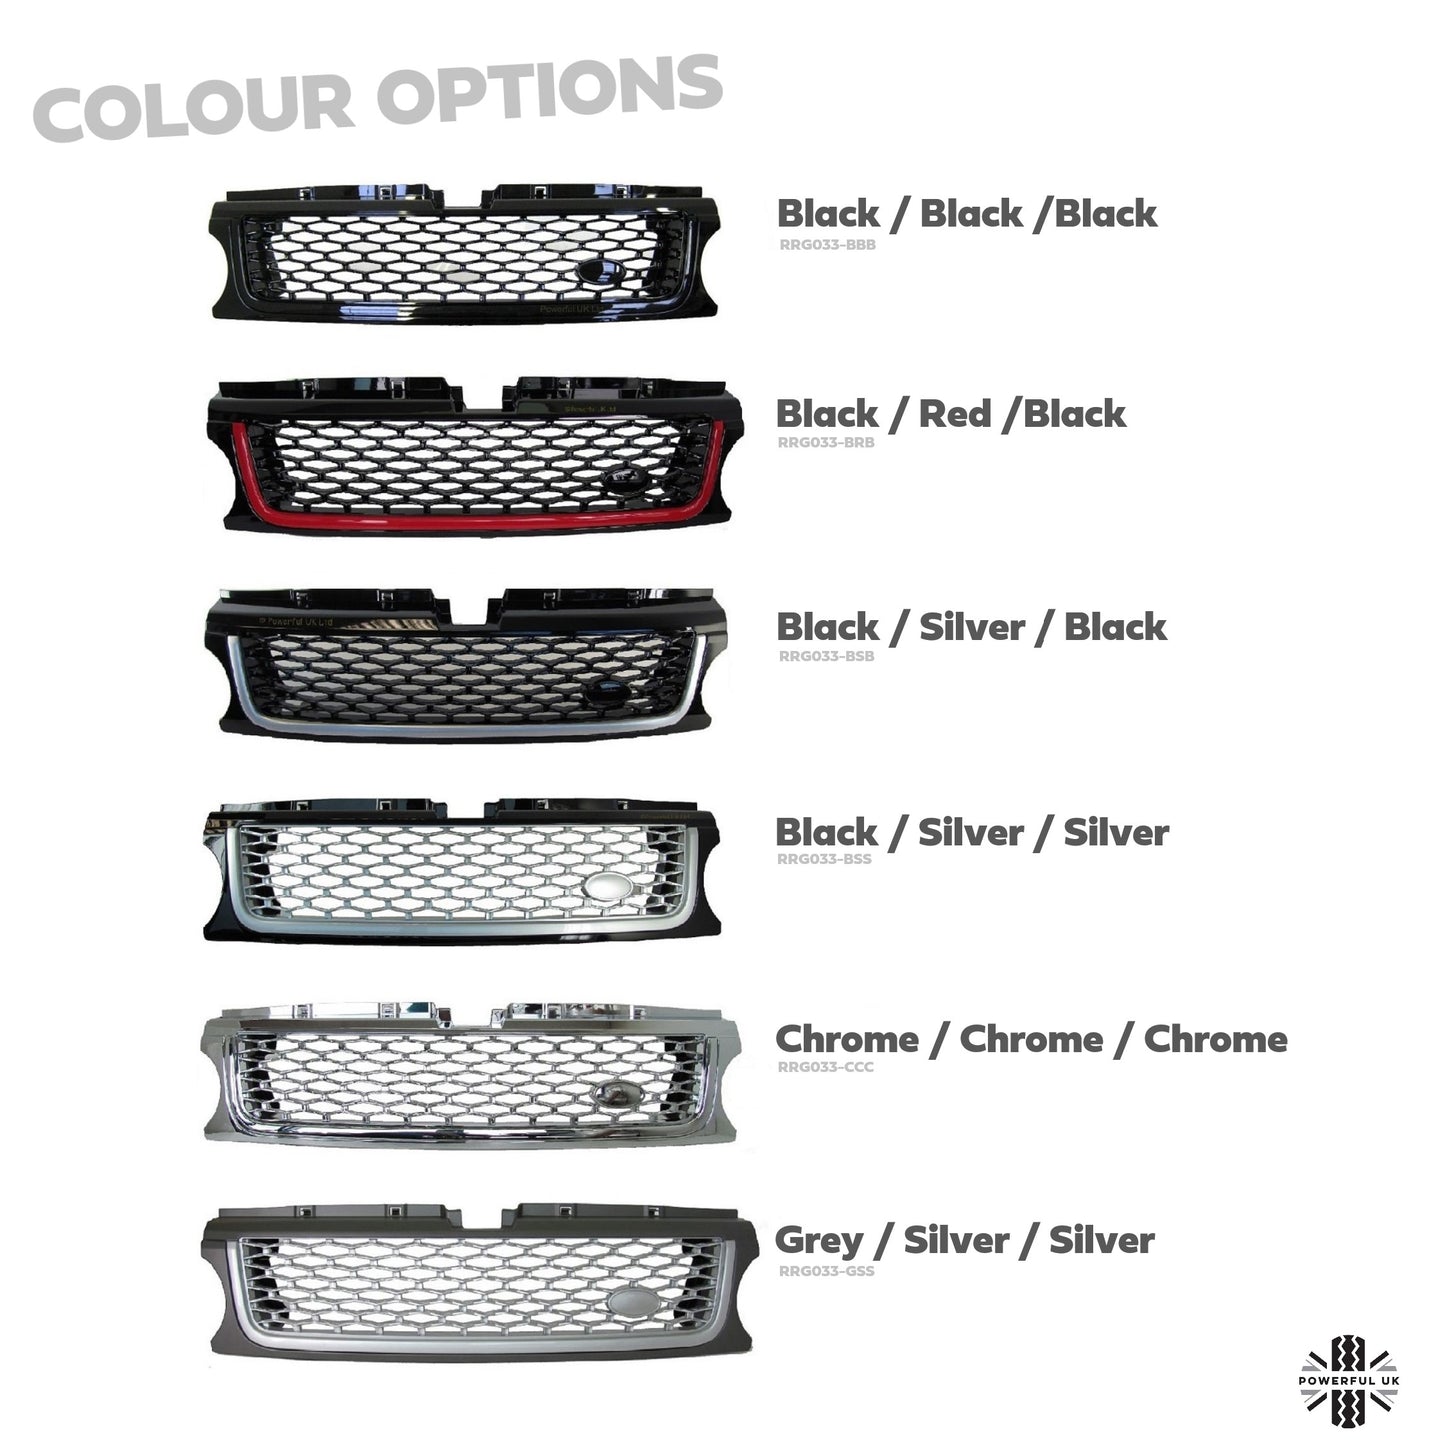 Black & Red "Autobiography Style" grille to fit Range Rover Sport 2010 on